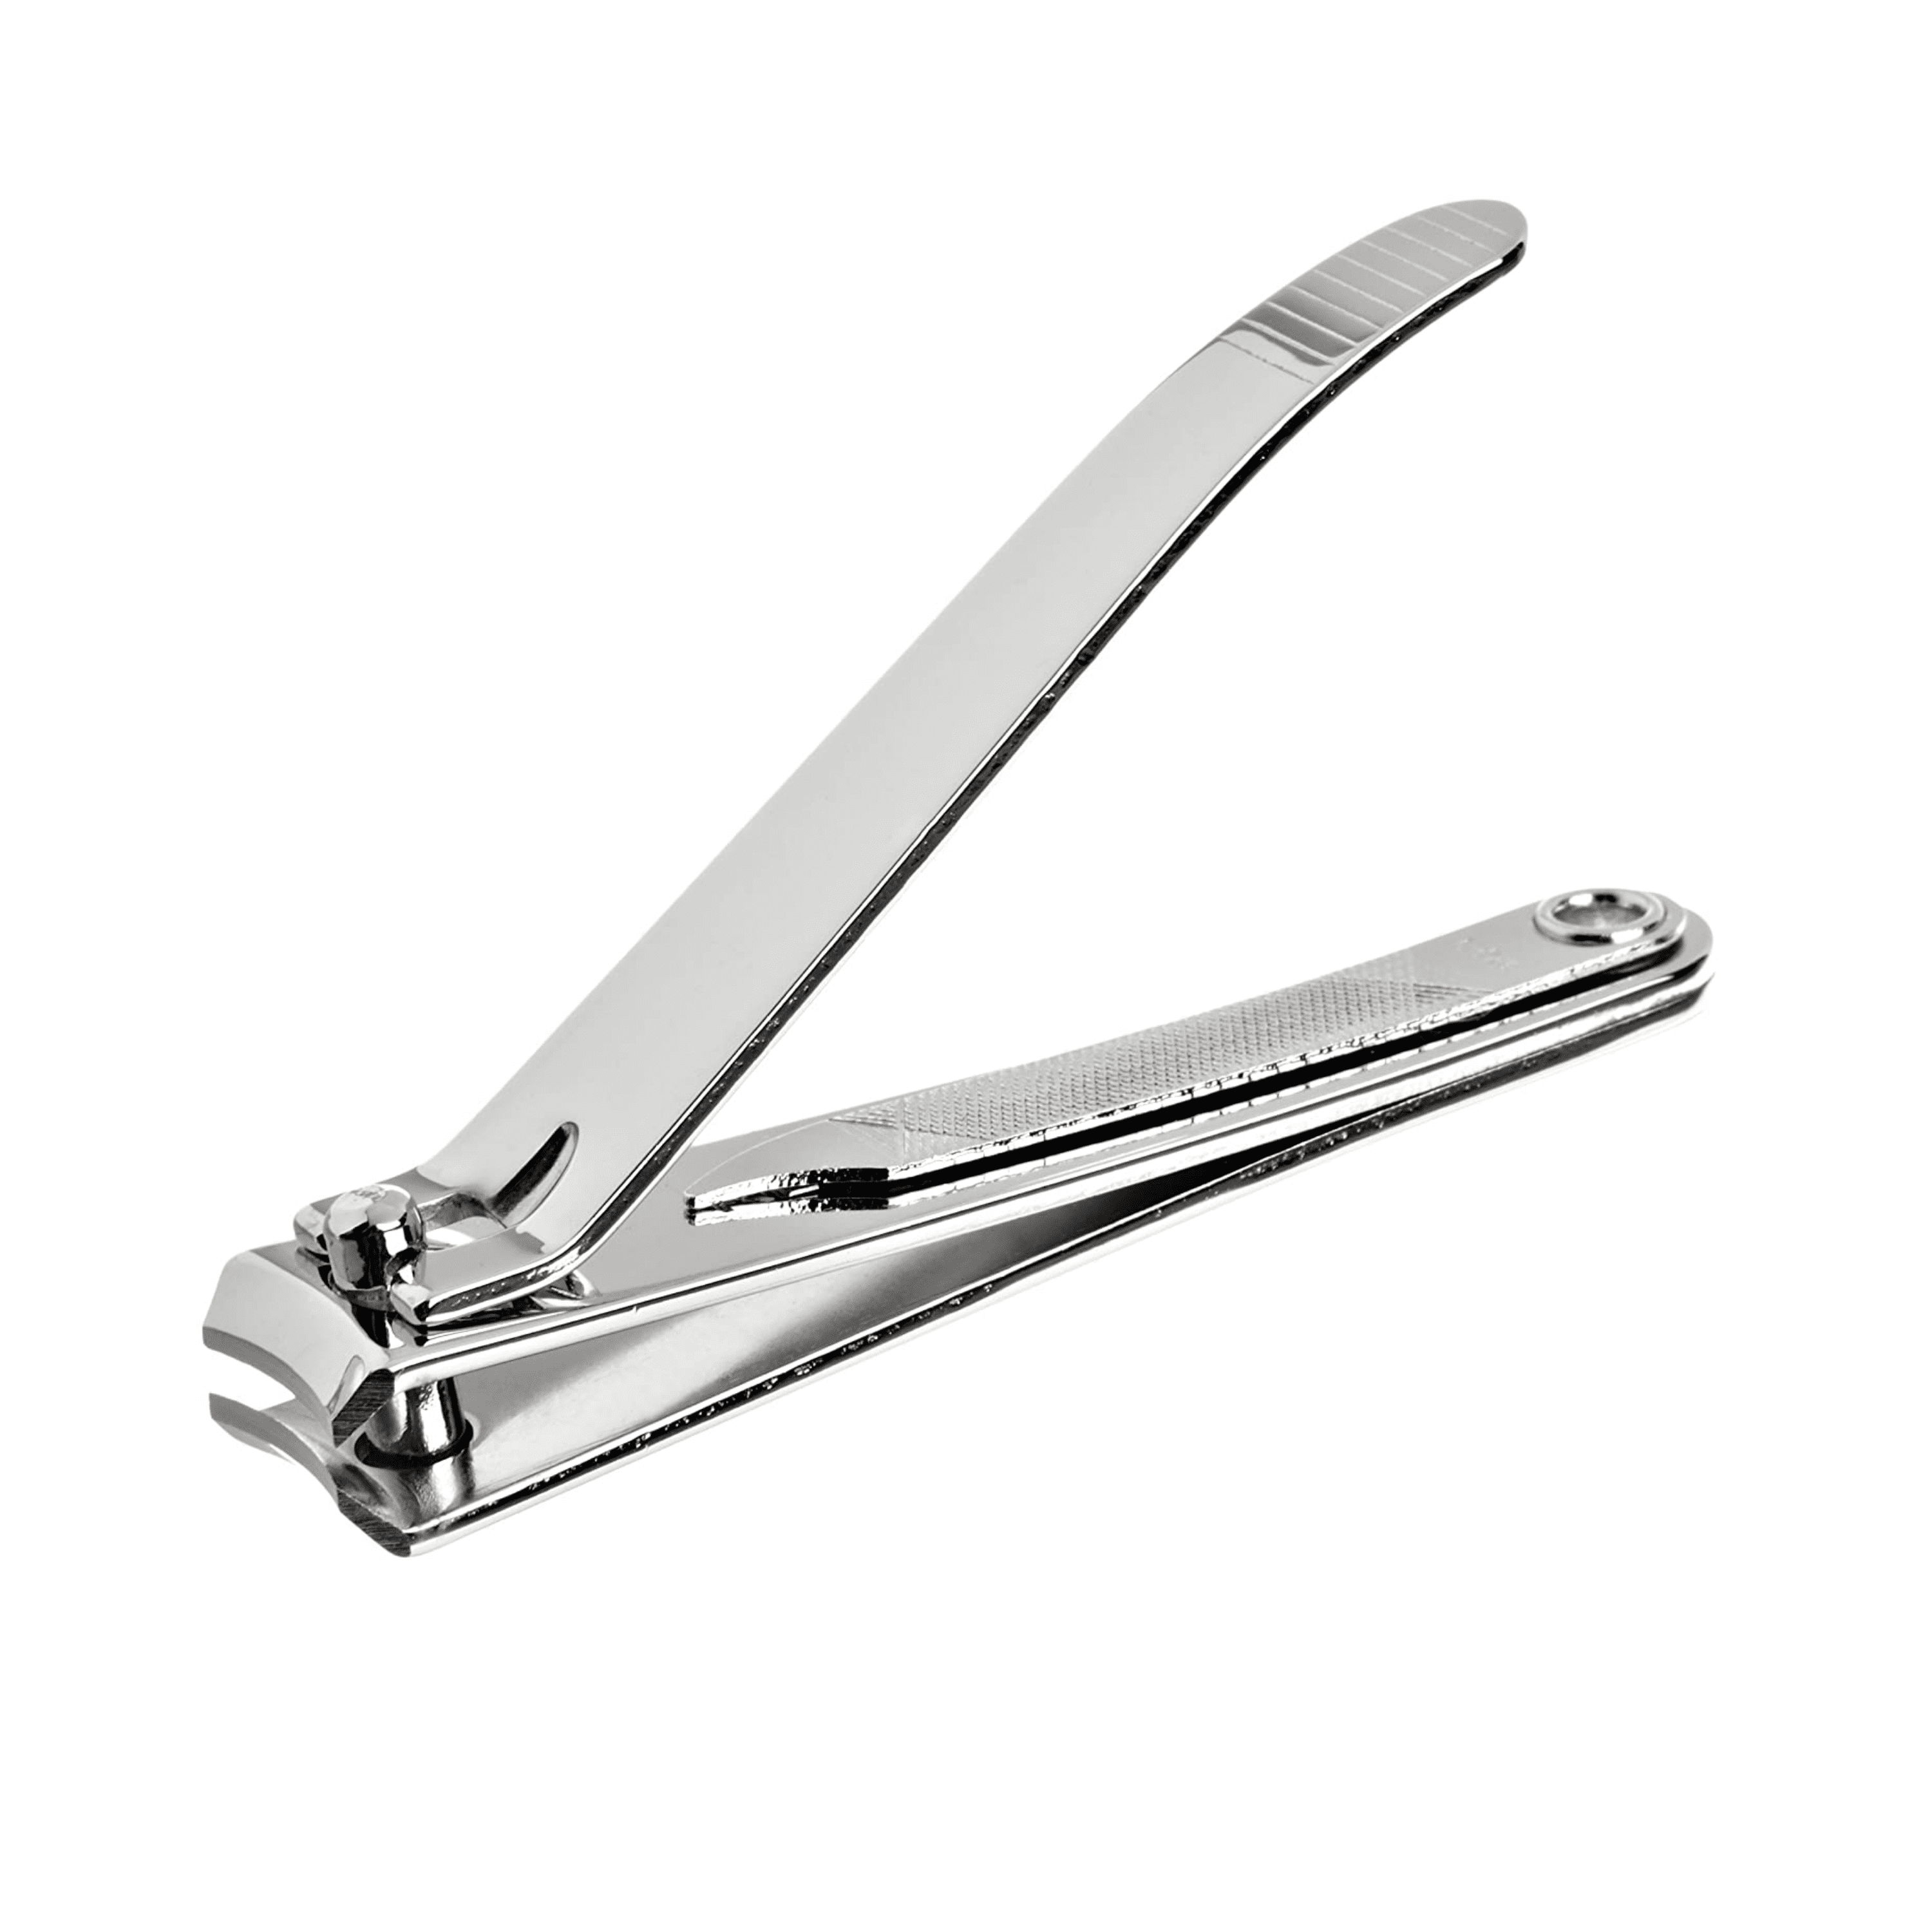 Revlon Toenail Clipper with Foldaway Nail File, Stainless Steel  Non-Corrosive Straight Blade Nail Cutter for Easy Trimming and Grooming, 1  Count 